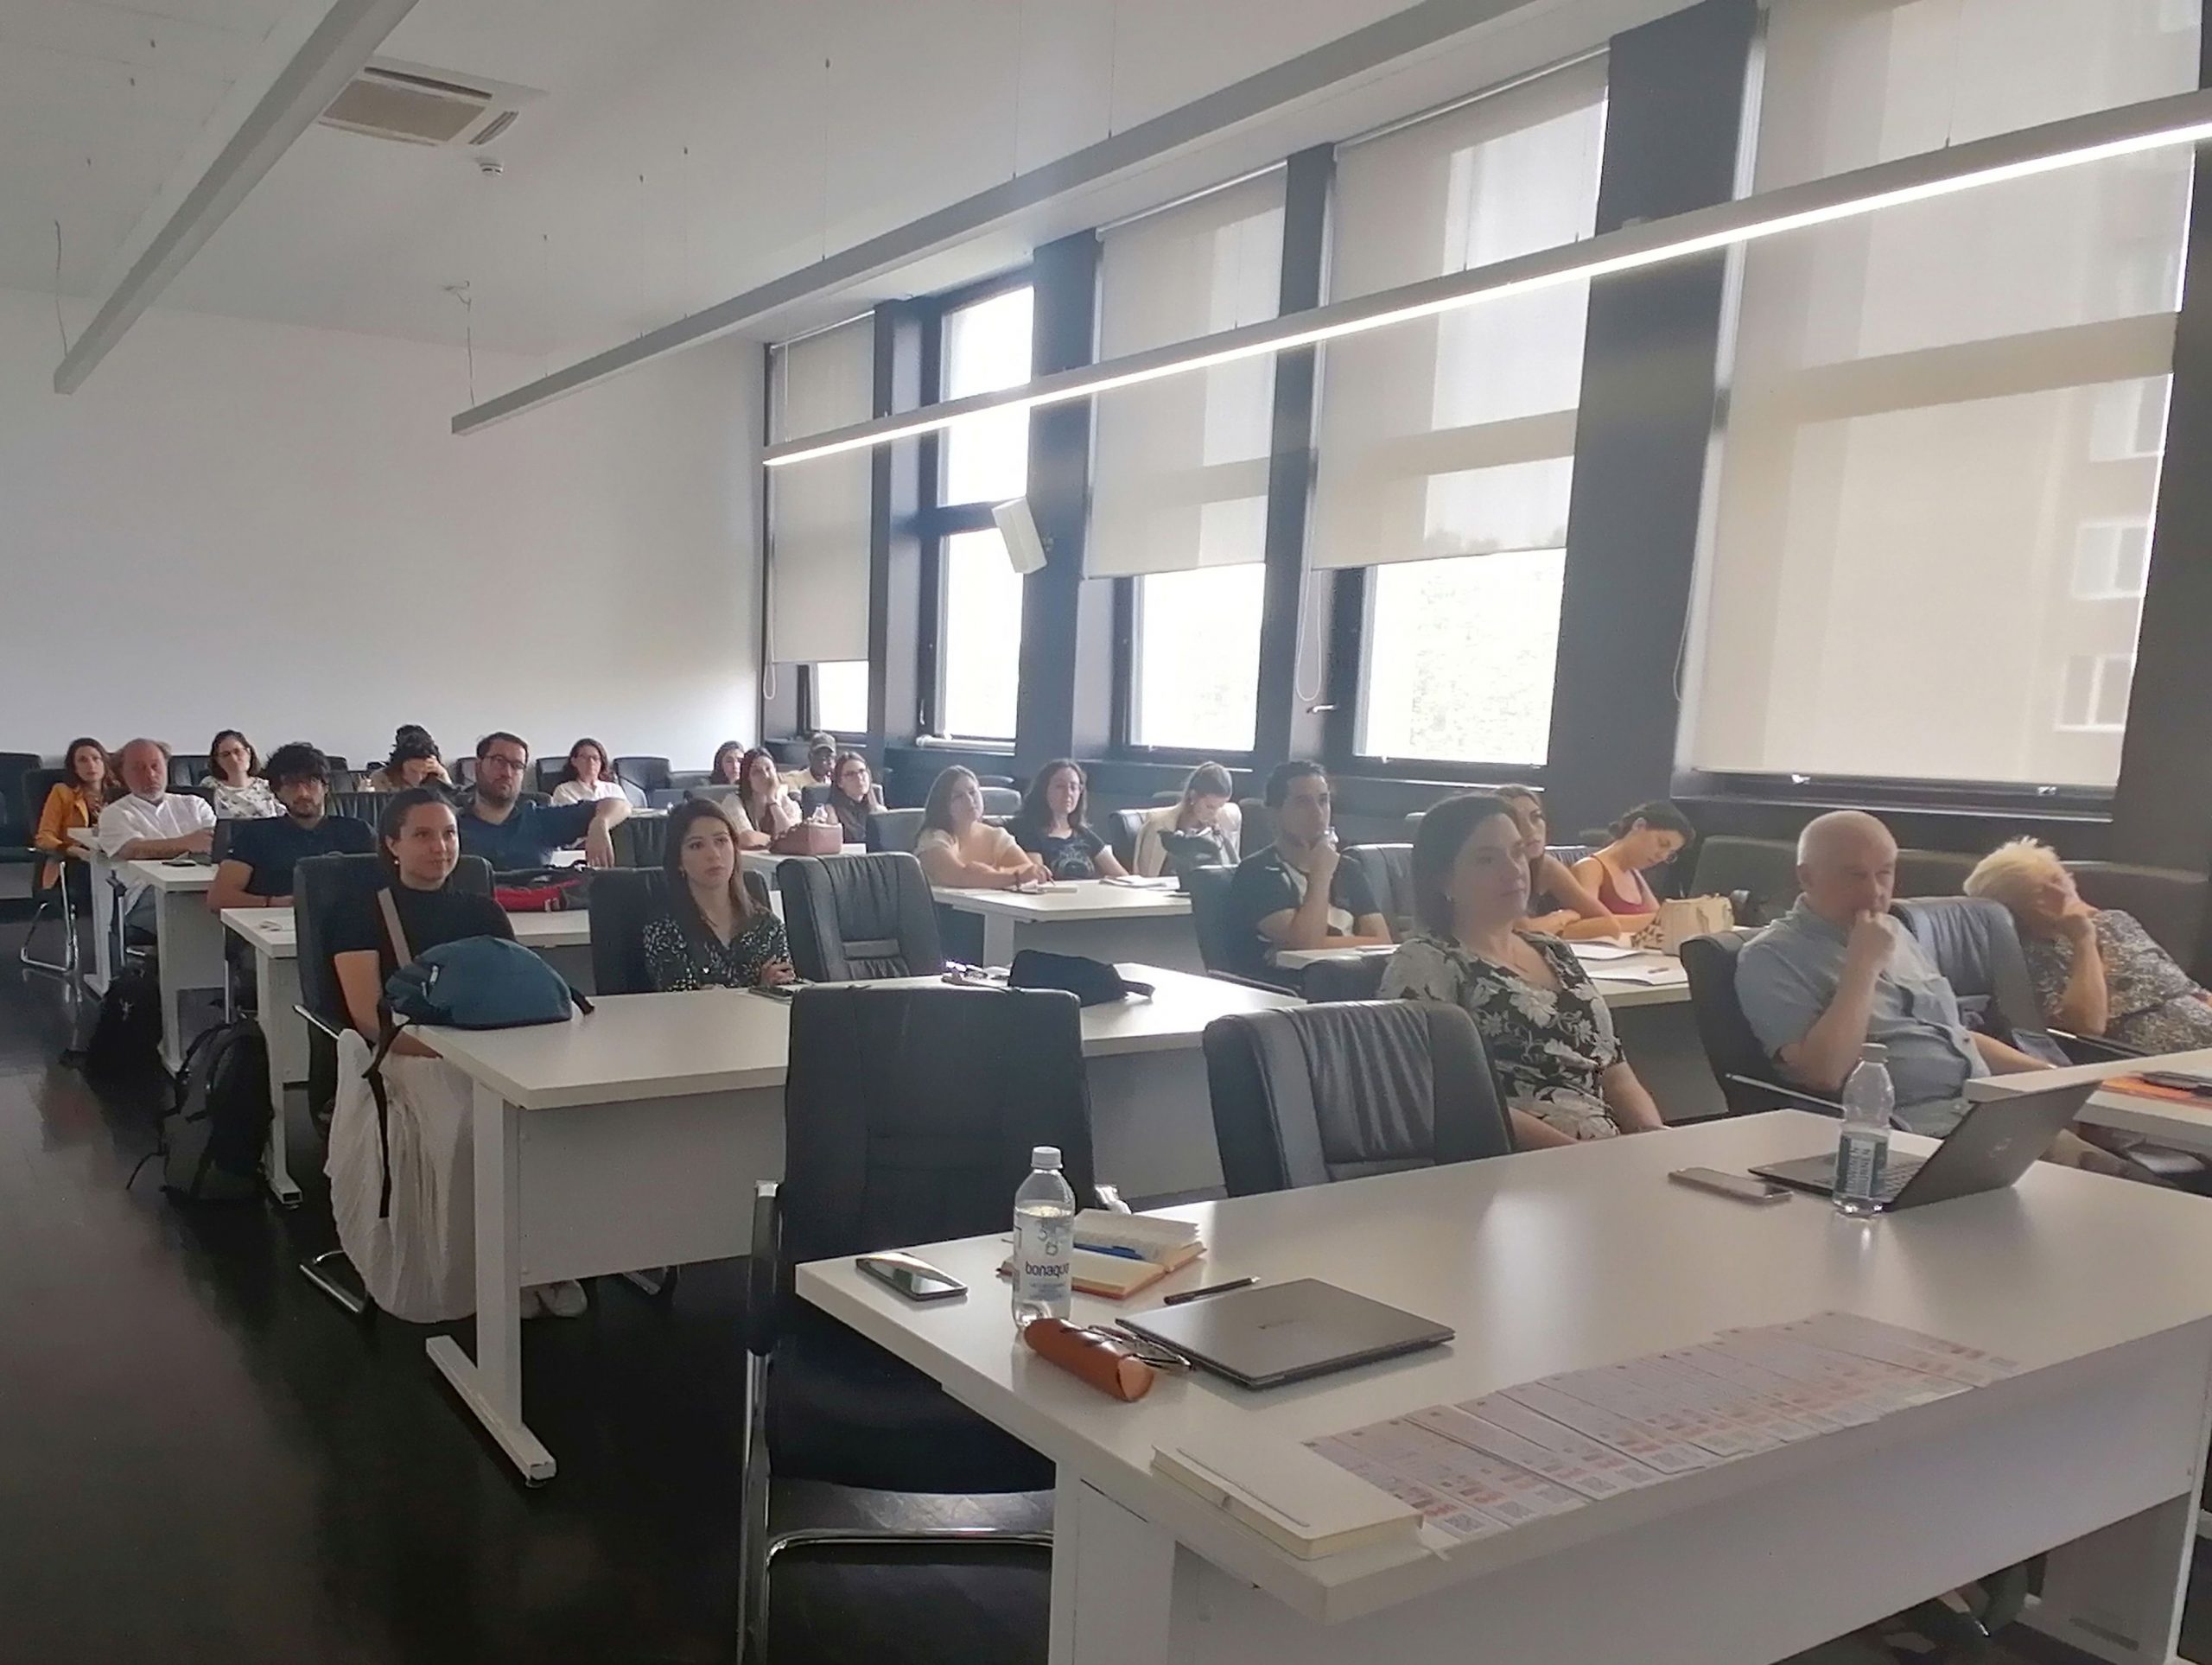 You are currently viewing A snapshot of the ExcellMater seminar and the PREMUROSA network school: take a look at the atmosphere and impressions